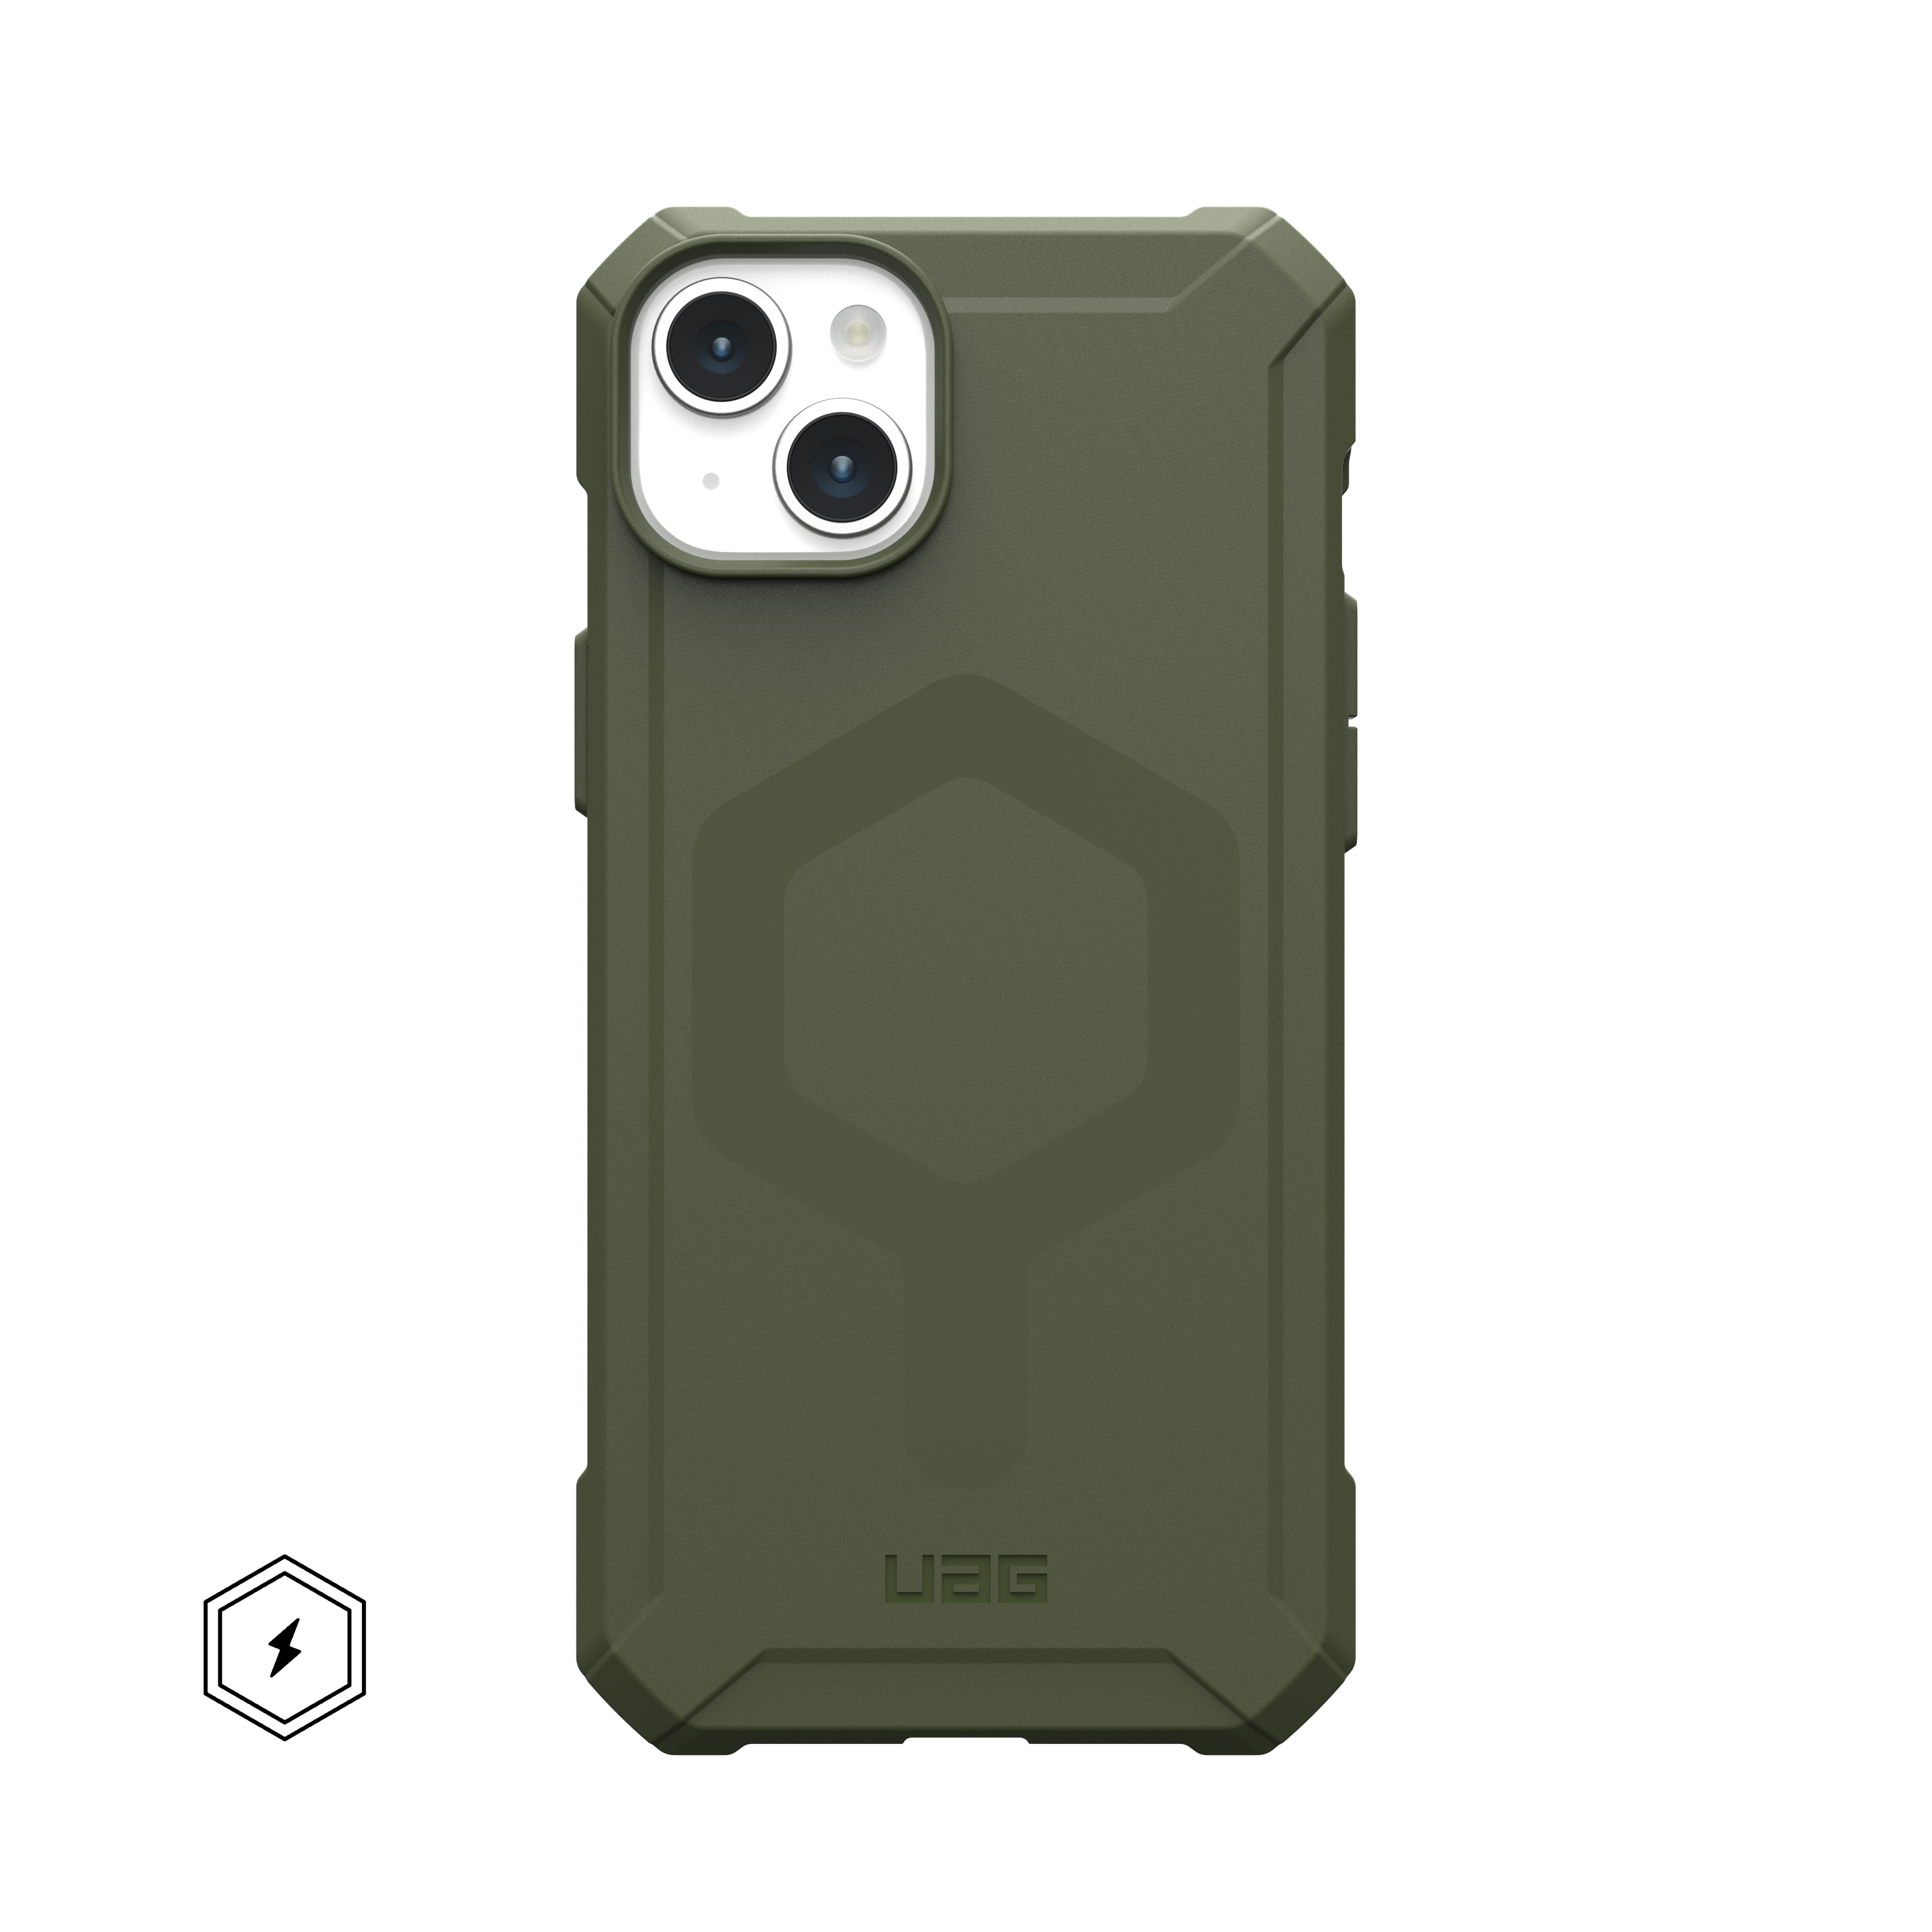 UAG Essential Armor For MagSafe iPhone 15 Pro Case